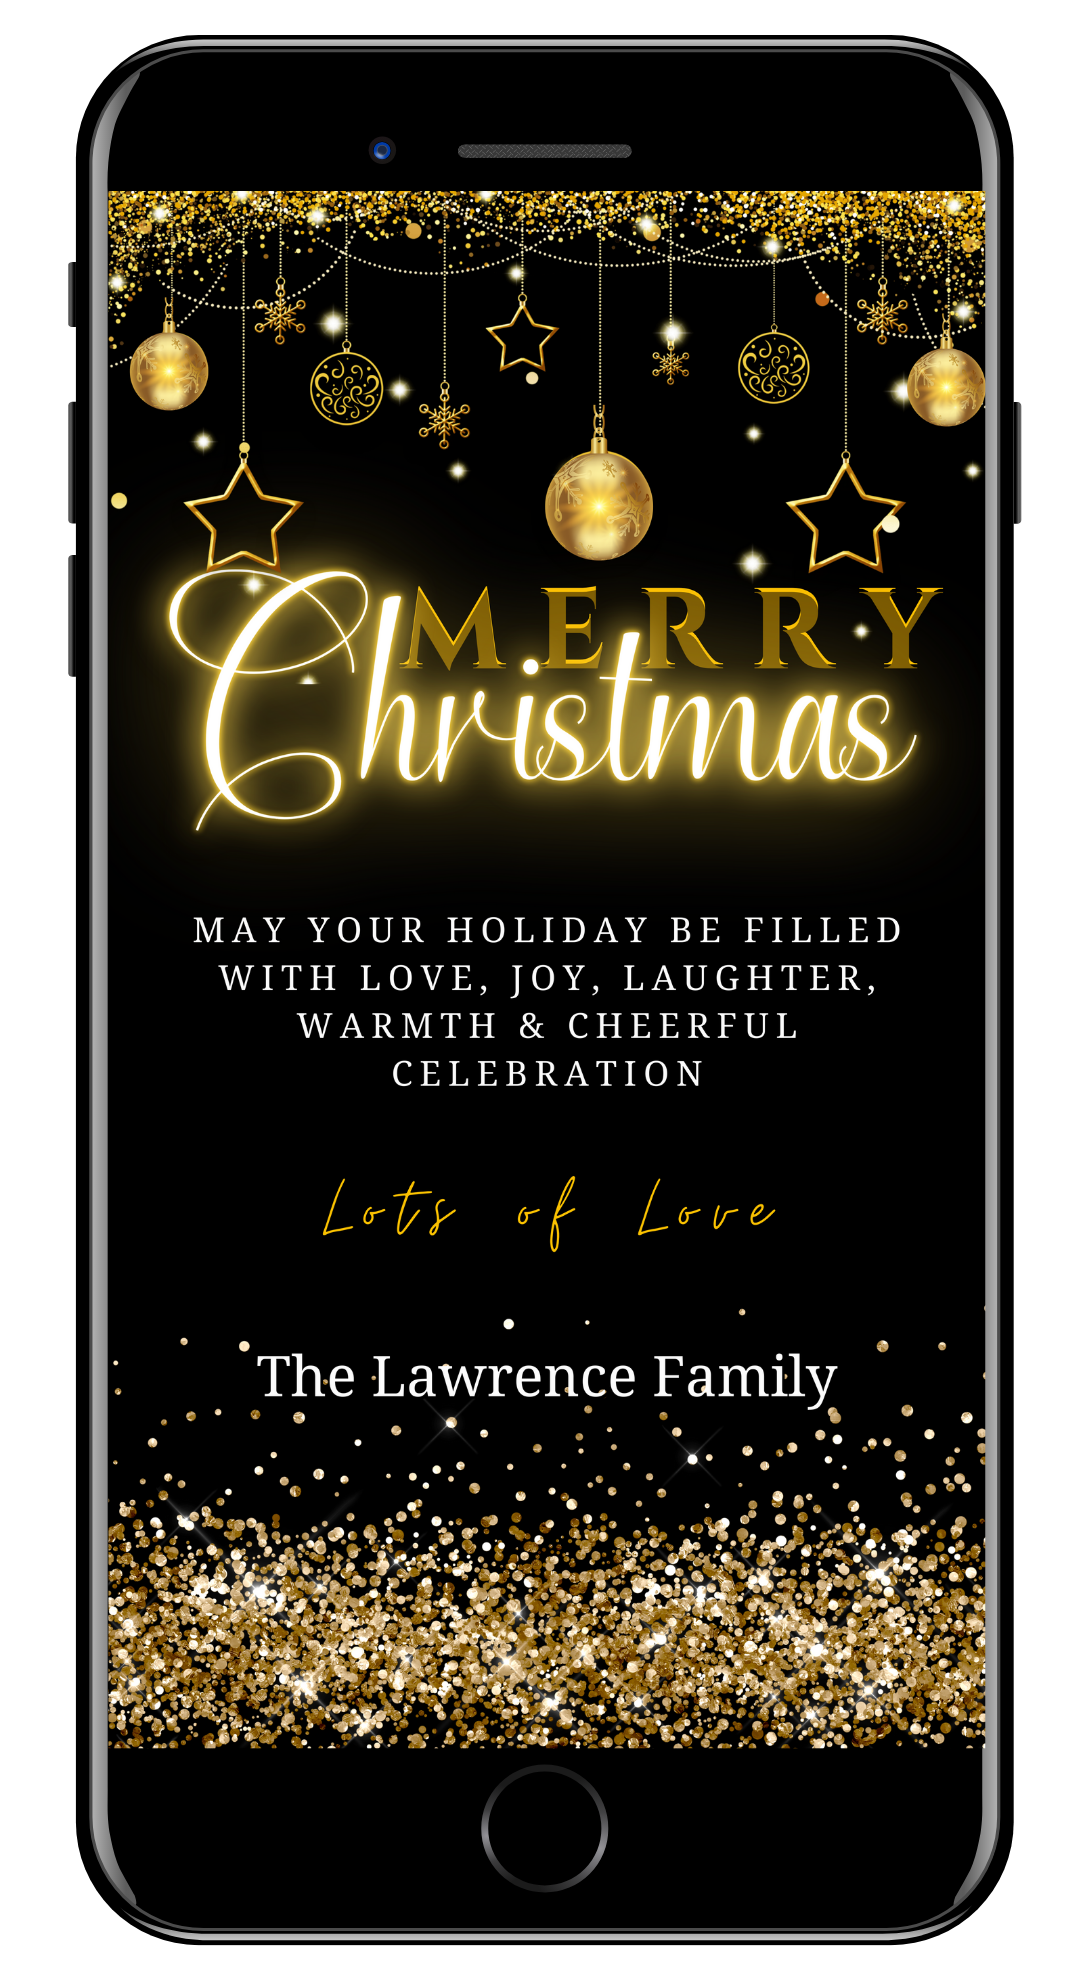 Black Gold Ornaments Glitter Merry Christmas Ecard displayed on a smartphone screen with festive gold text and ornaments. Editable via Canva for personalizing and digital sharing.